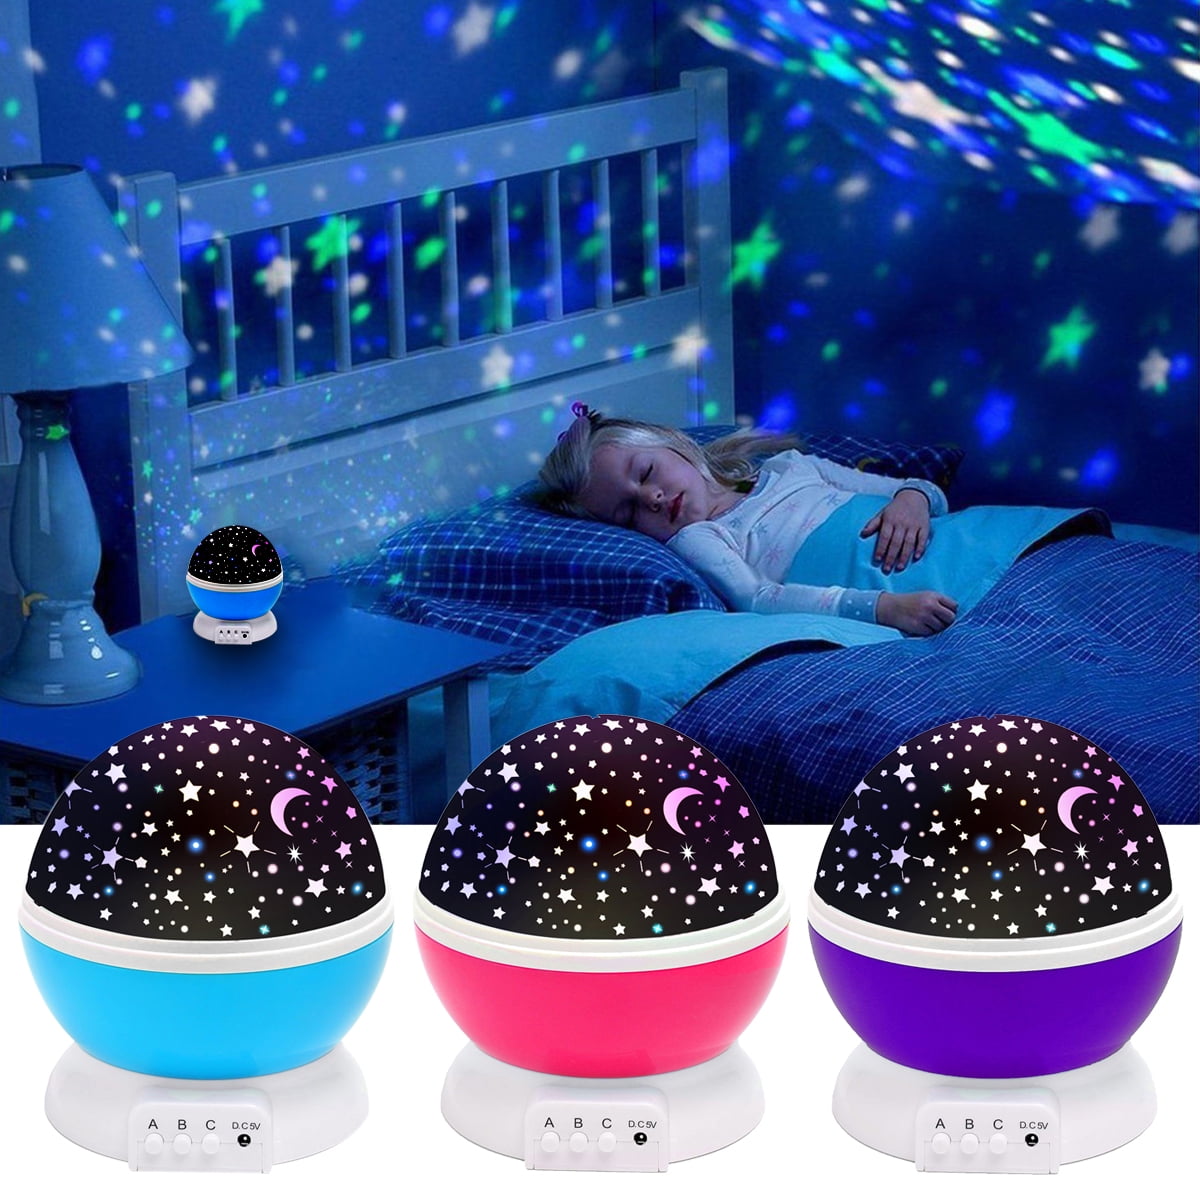 Romantic LED Star light Starry Night Sky Projector Lamp Cosmos Master Xmas Gifts 